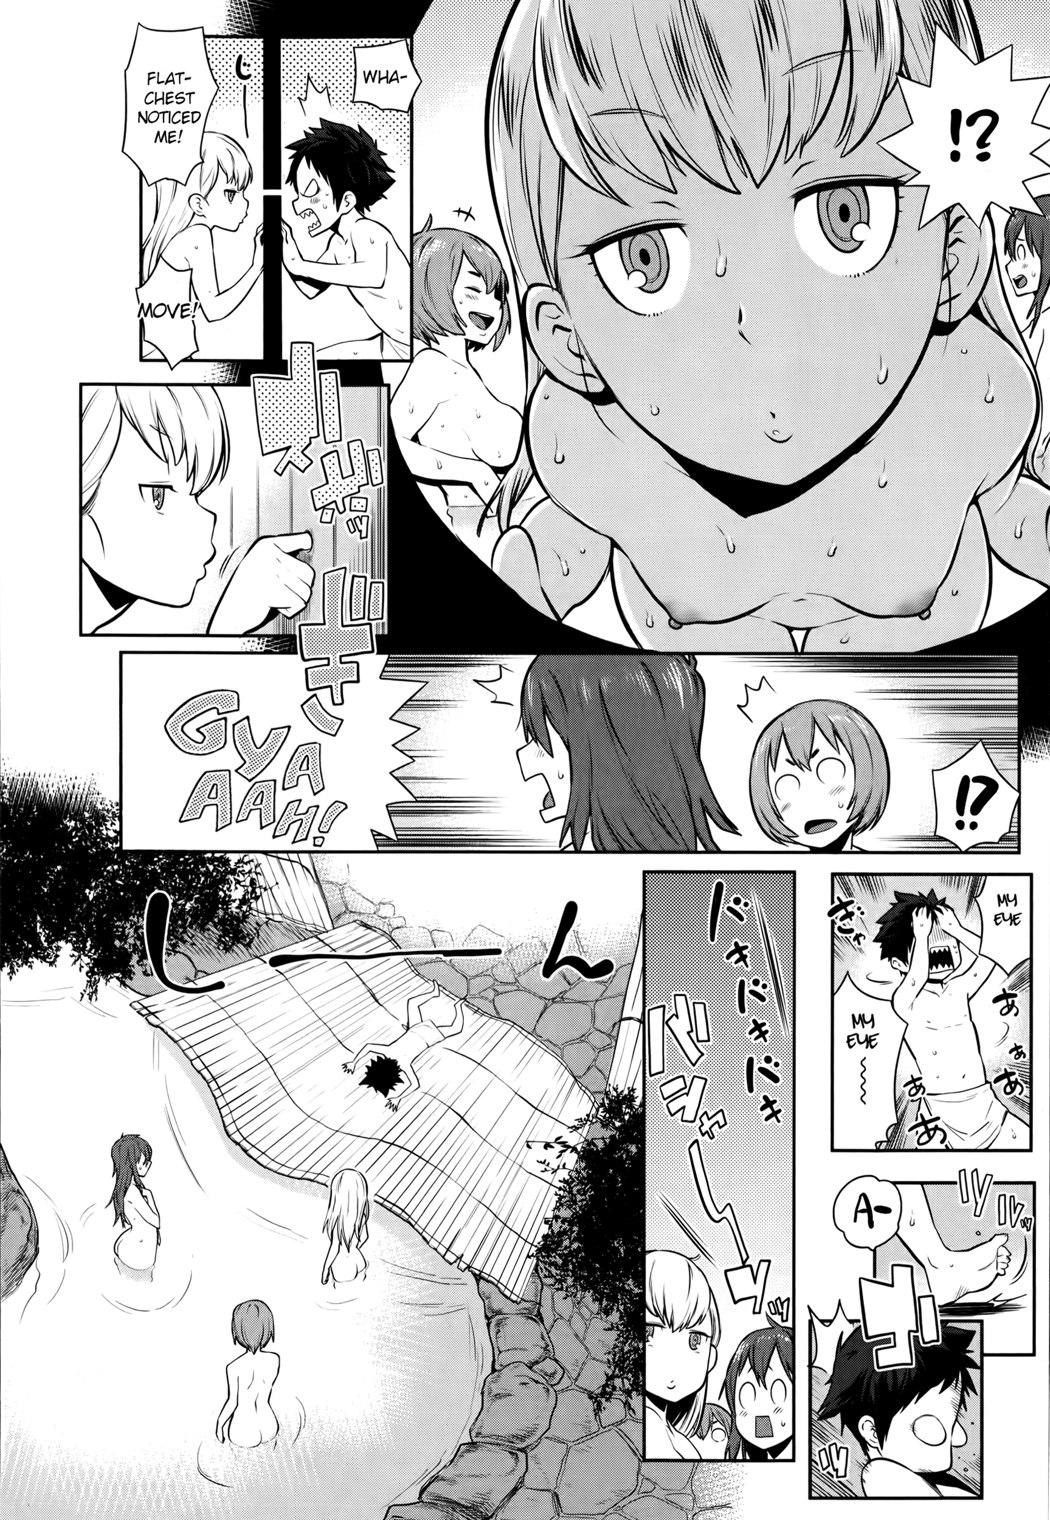 Trans Oneshota Onsen Ch. 1 Leaked - Page 6